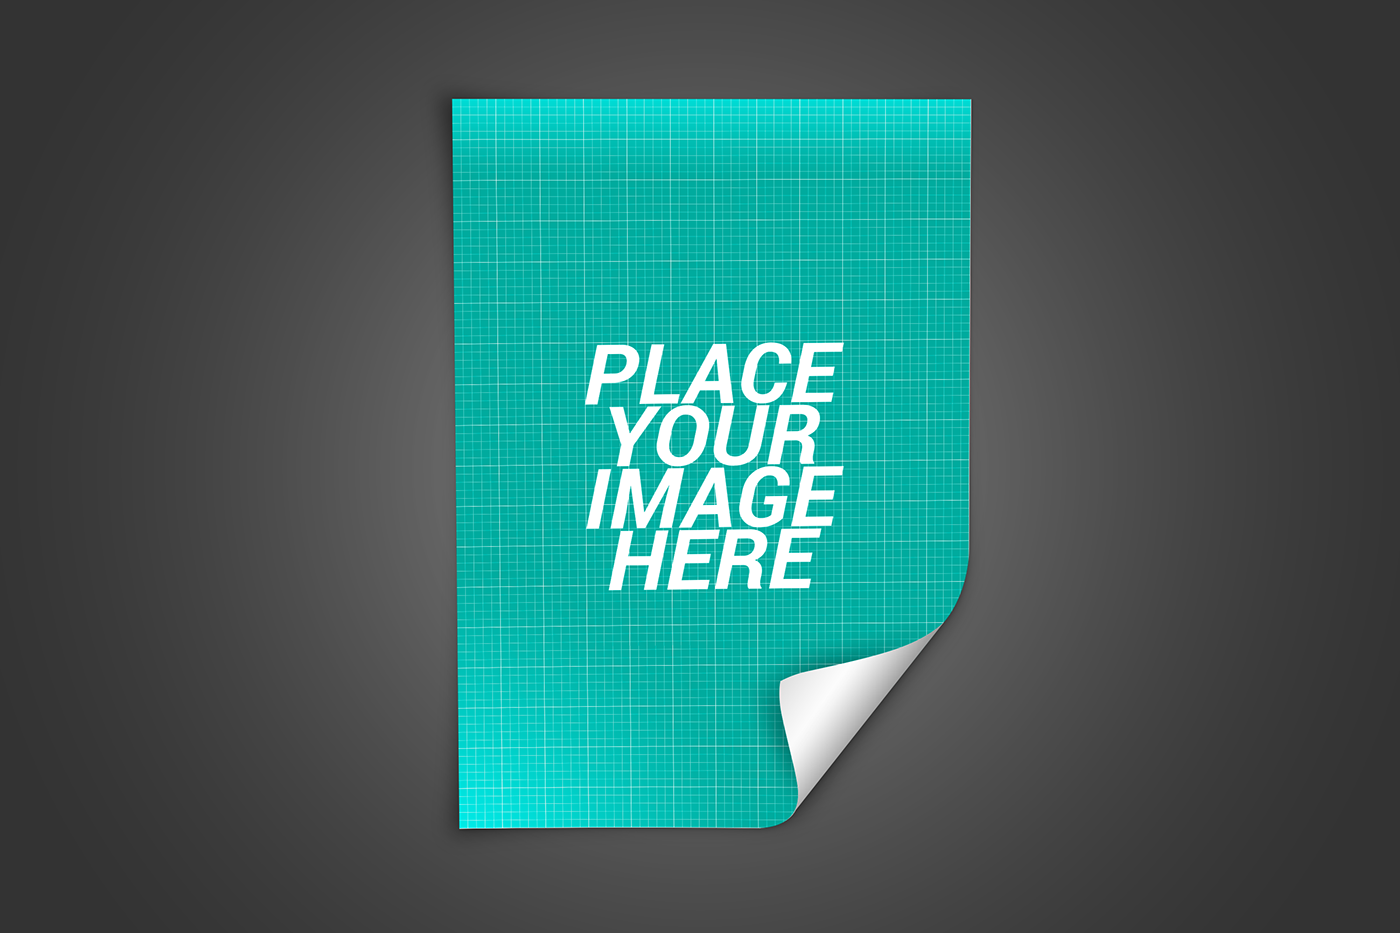 Free PSD Files of Flyer Mockups